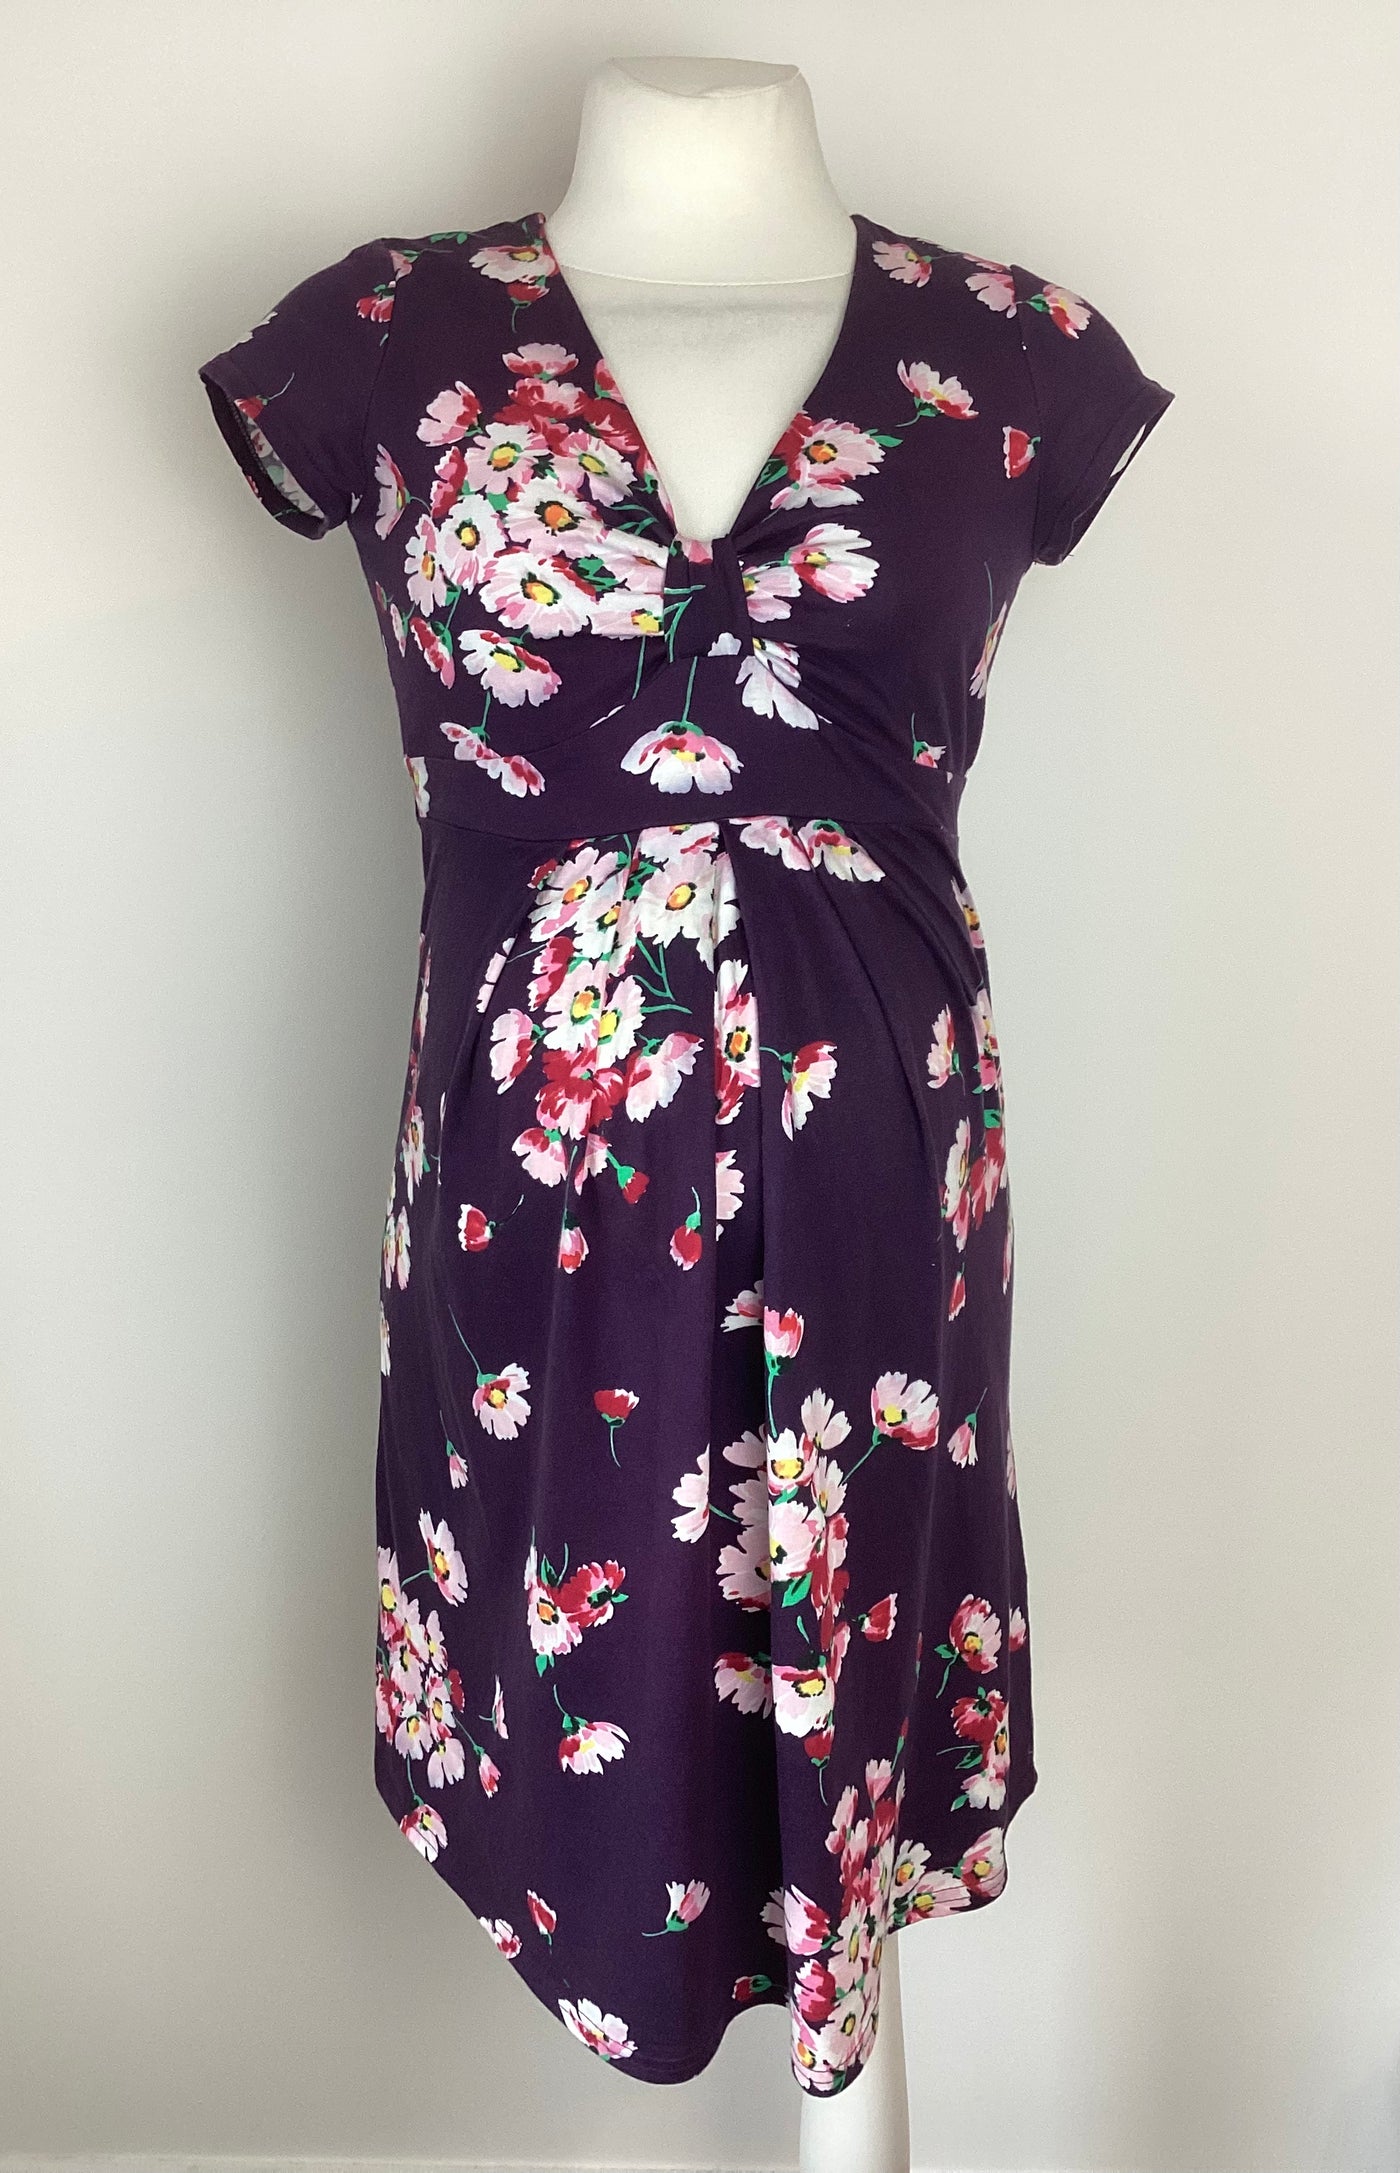 Dorothy Perkins Maternity purple & pink floral dress with waist tie - Size 8